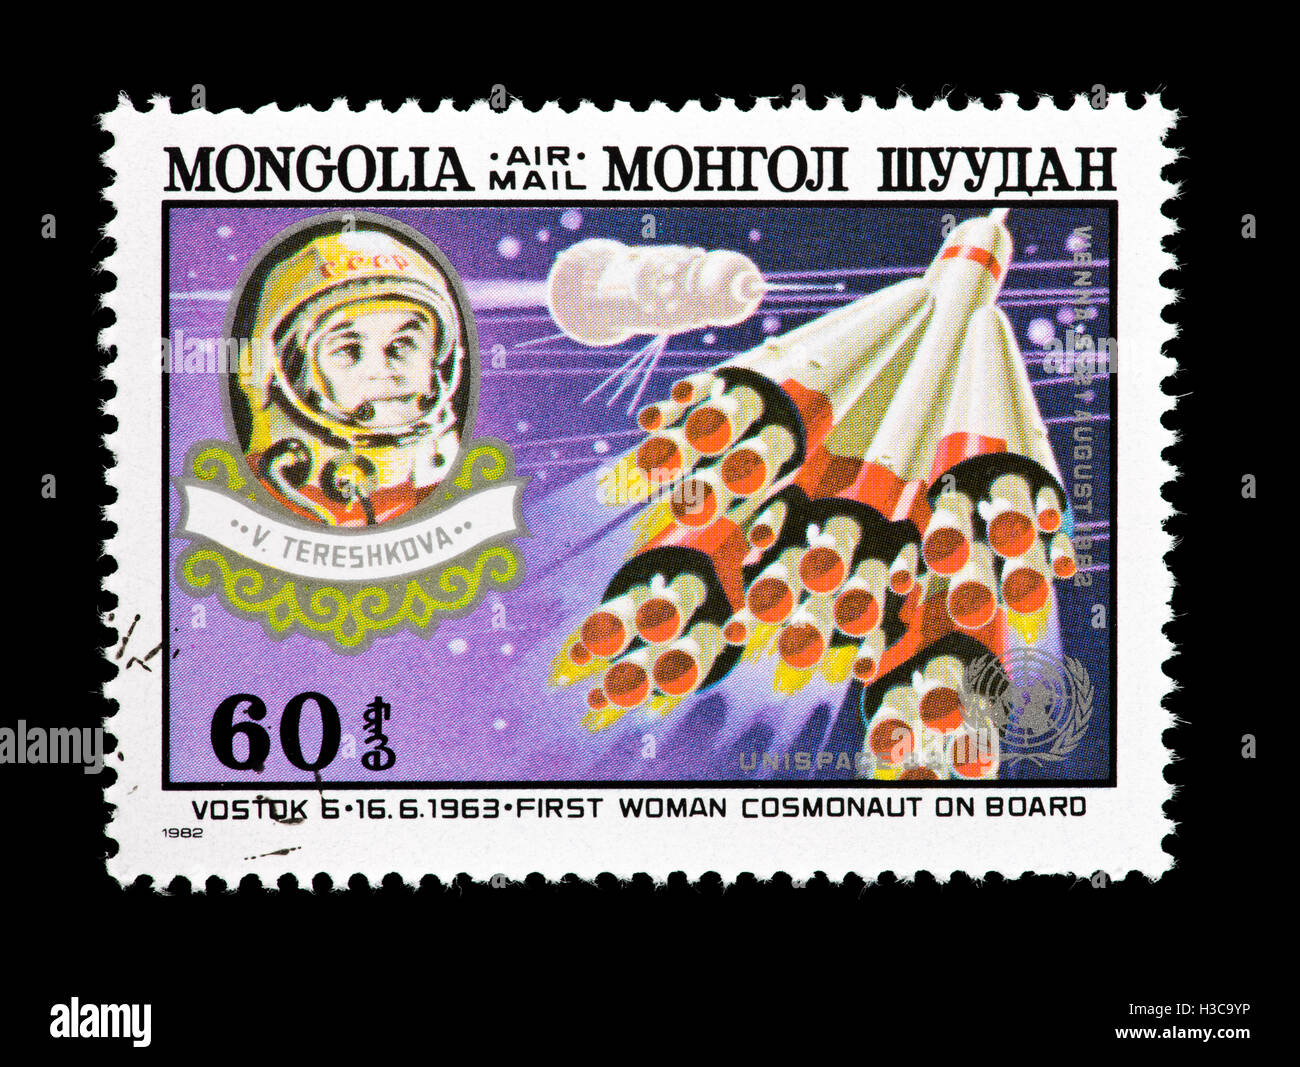 Postage stamp from Mongolia depicting Vostok 6 and Soviet cosmonaut Valentina Tereshkova, UN conference, peaceful use of space. Stock Photo